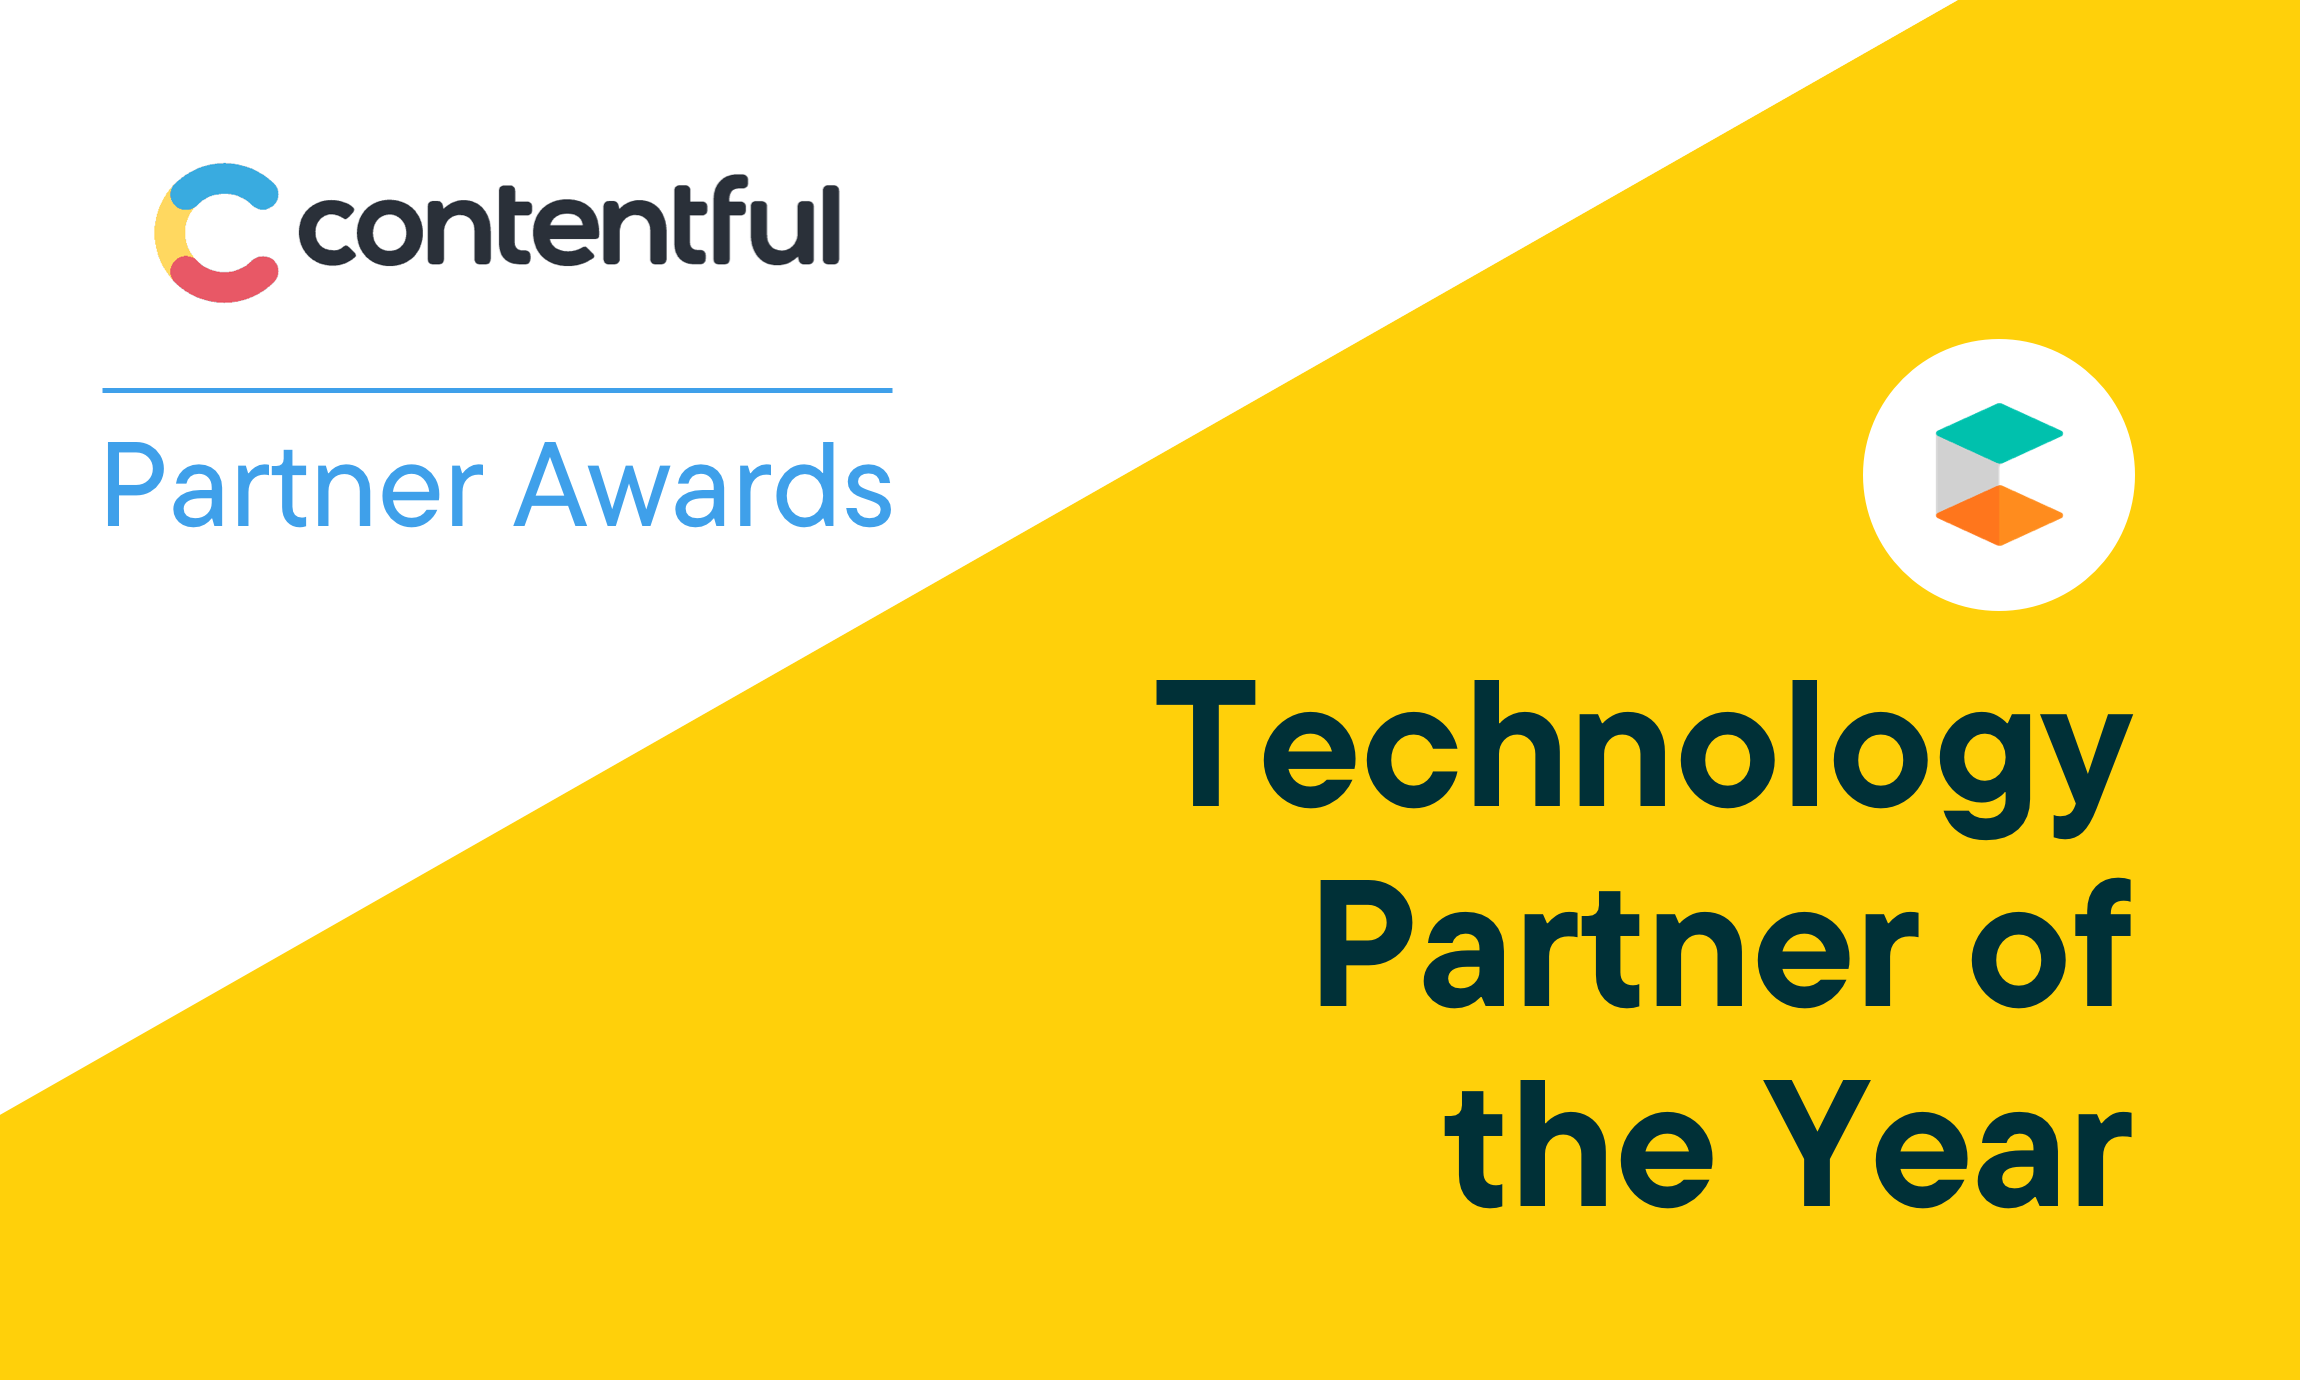 commercetools Named Technology Partner of the Year by Contentful